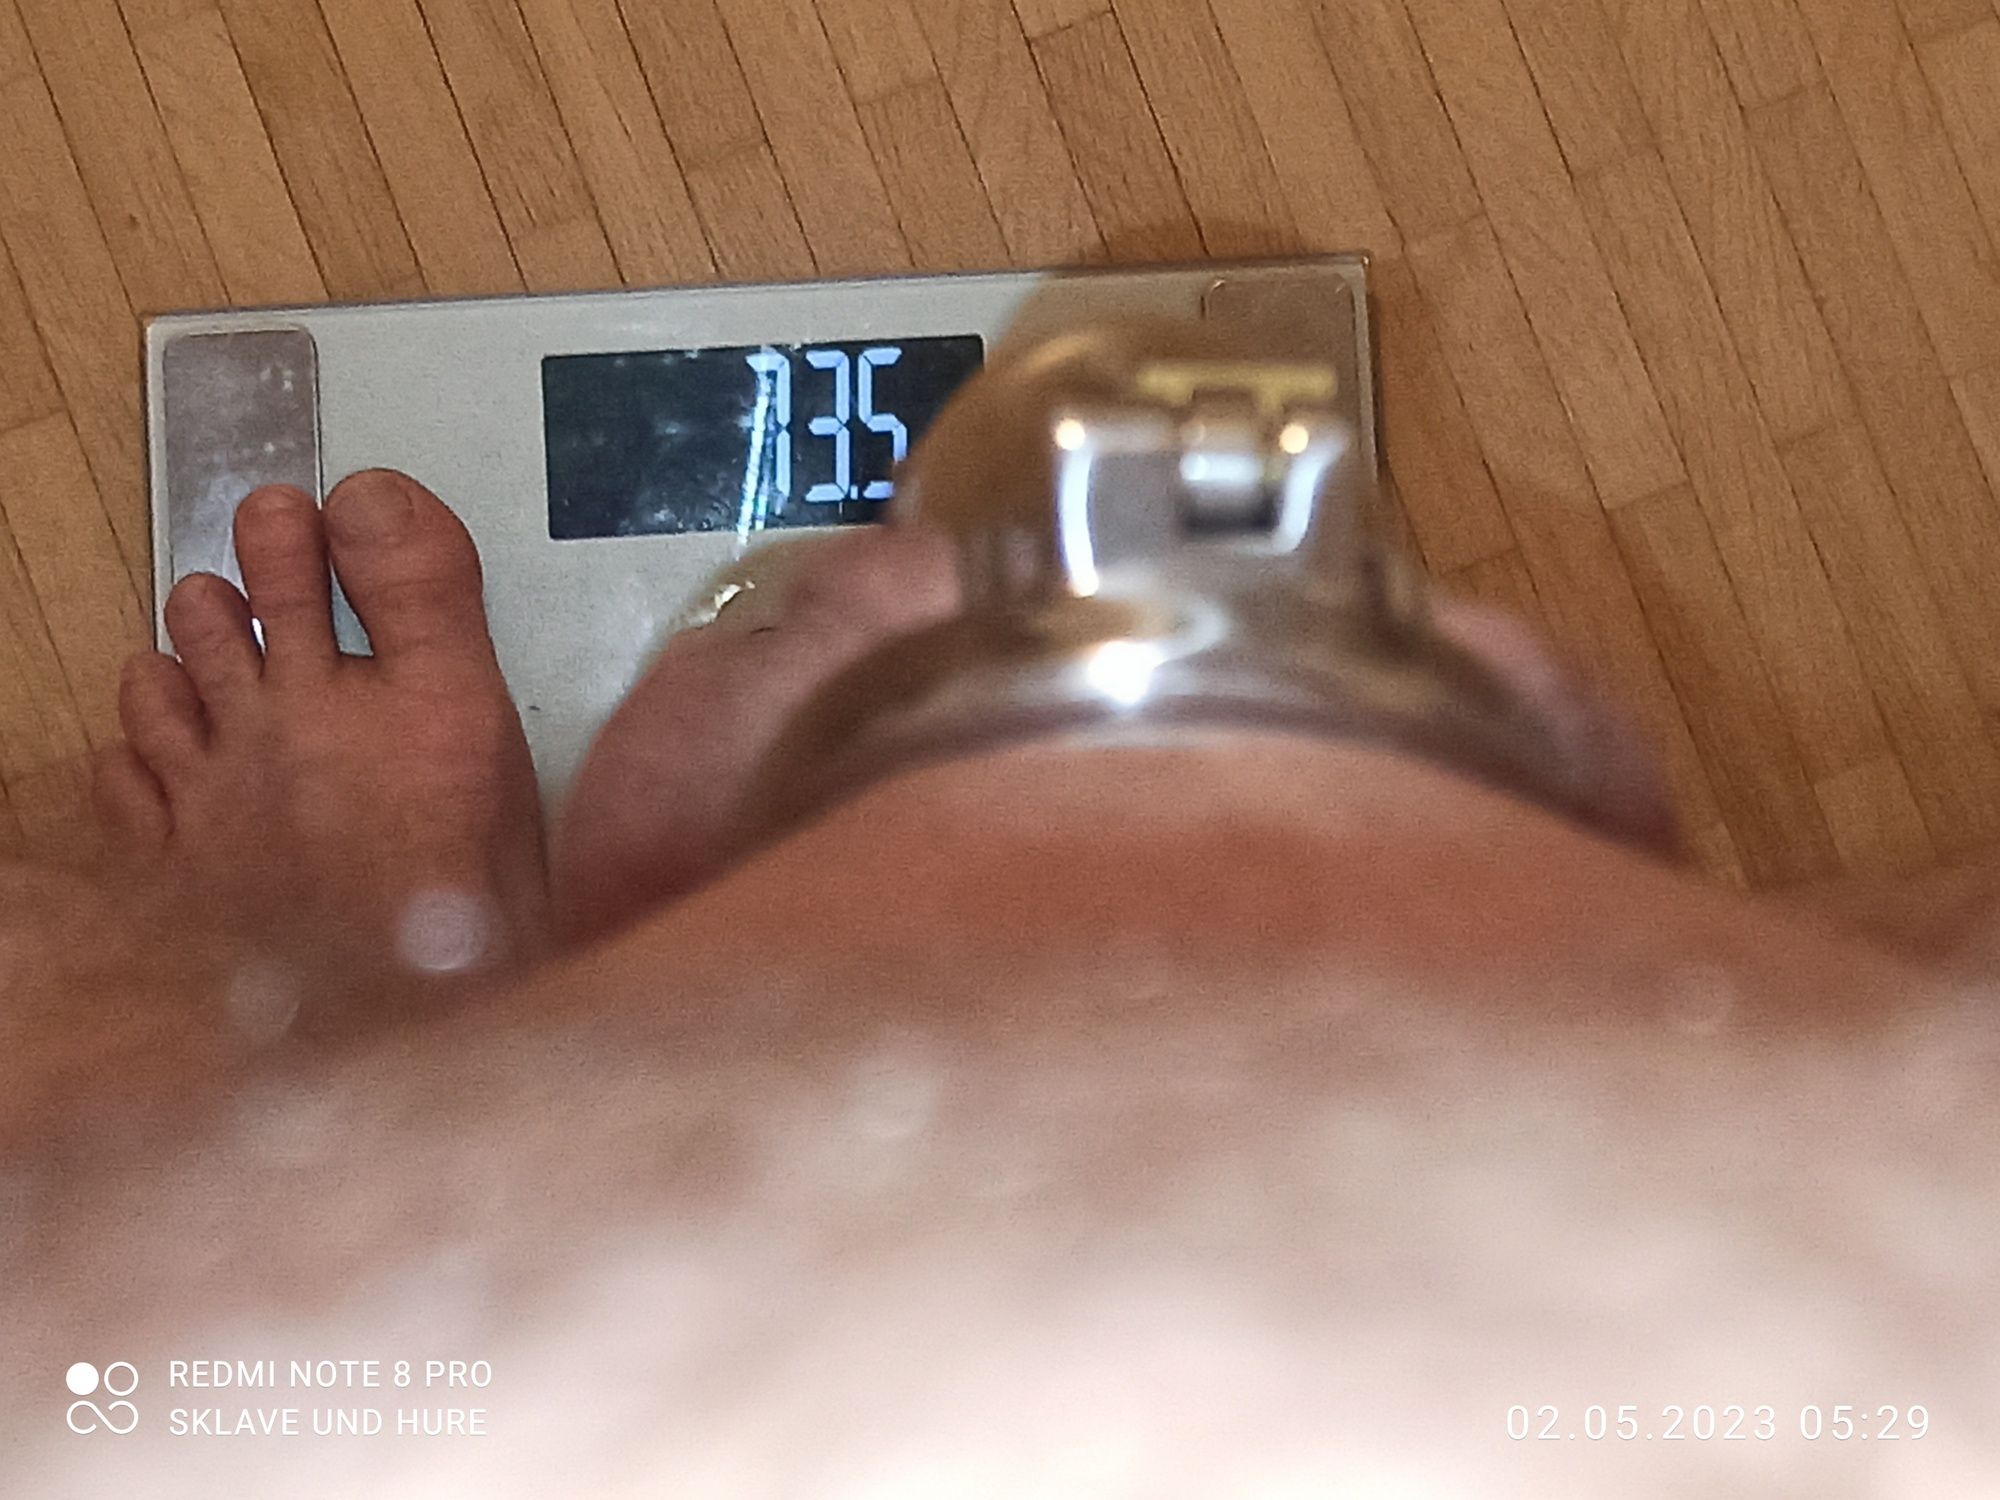 Disobedient slave after weighing, cagecheck 02.05.2023 #23